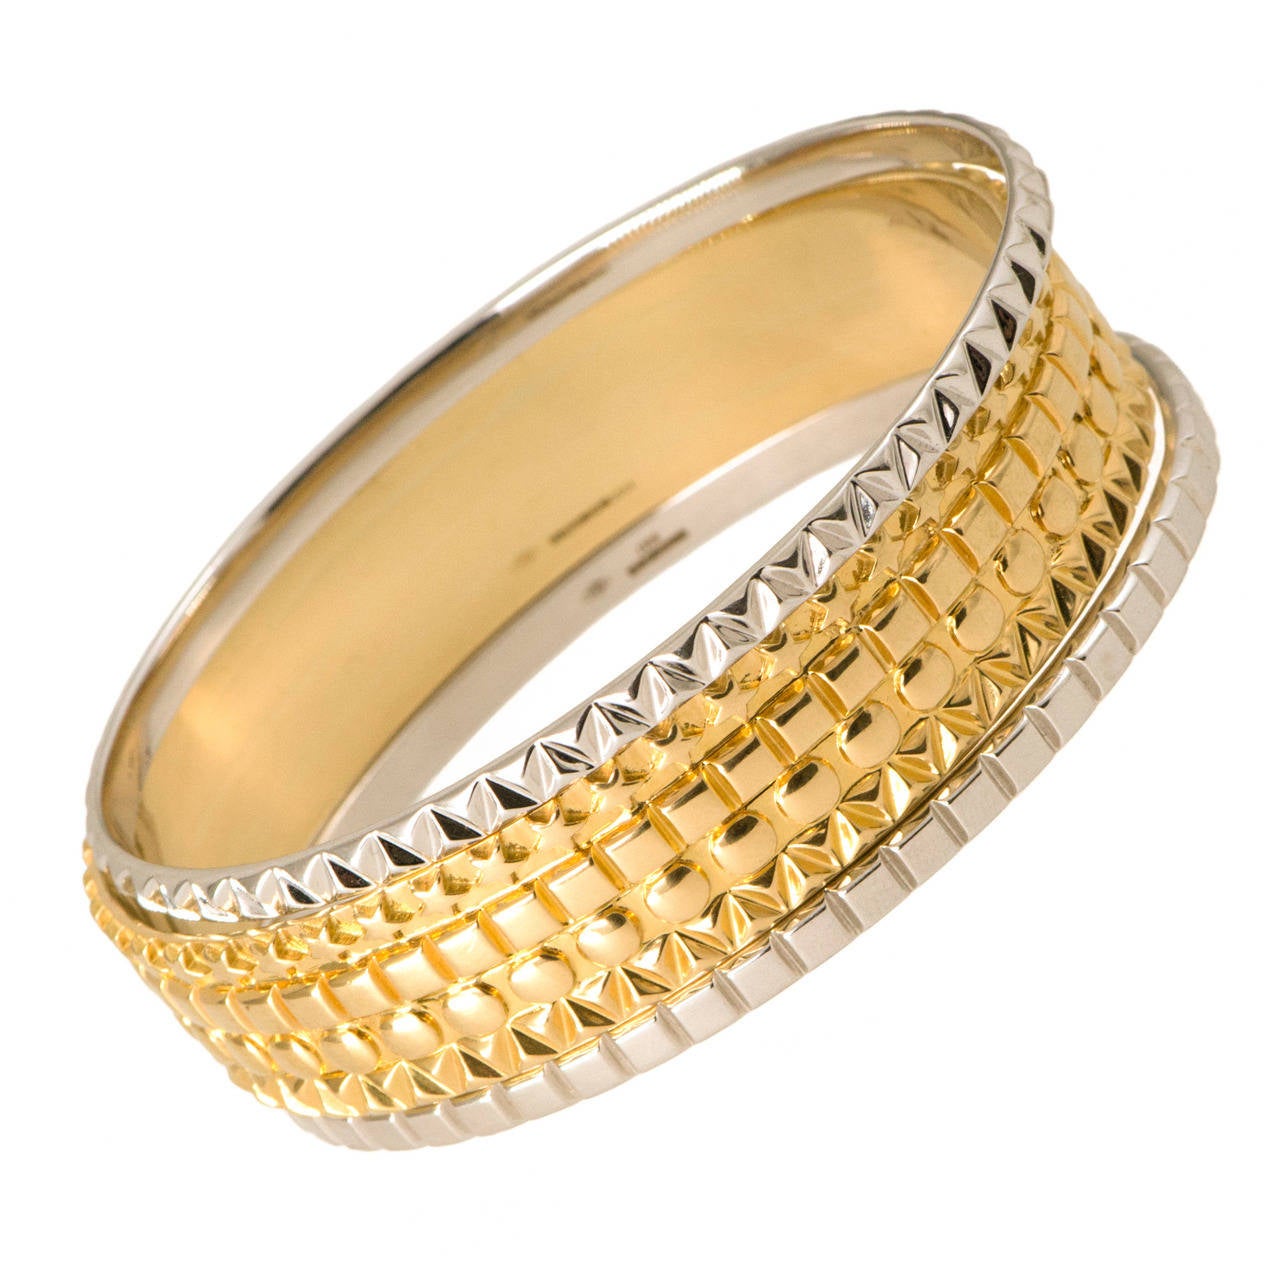 2011 Solange Azagury-Partridge, Set of 3 Bangles in Yellow and White Gold